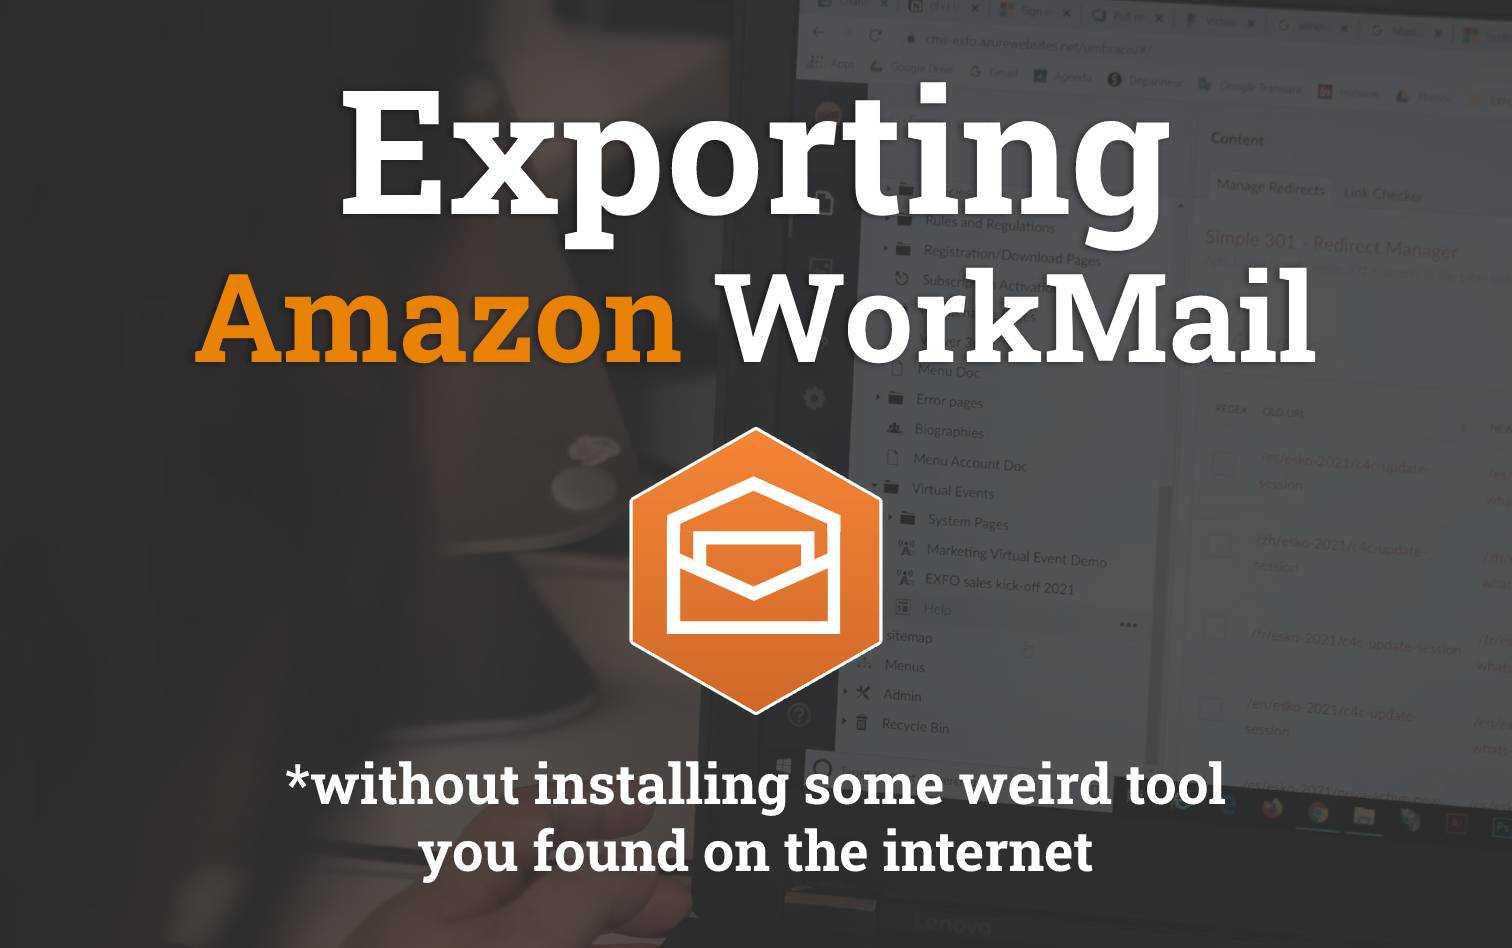 Exporting Amazon WorkMail content programmatically